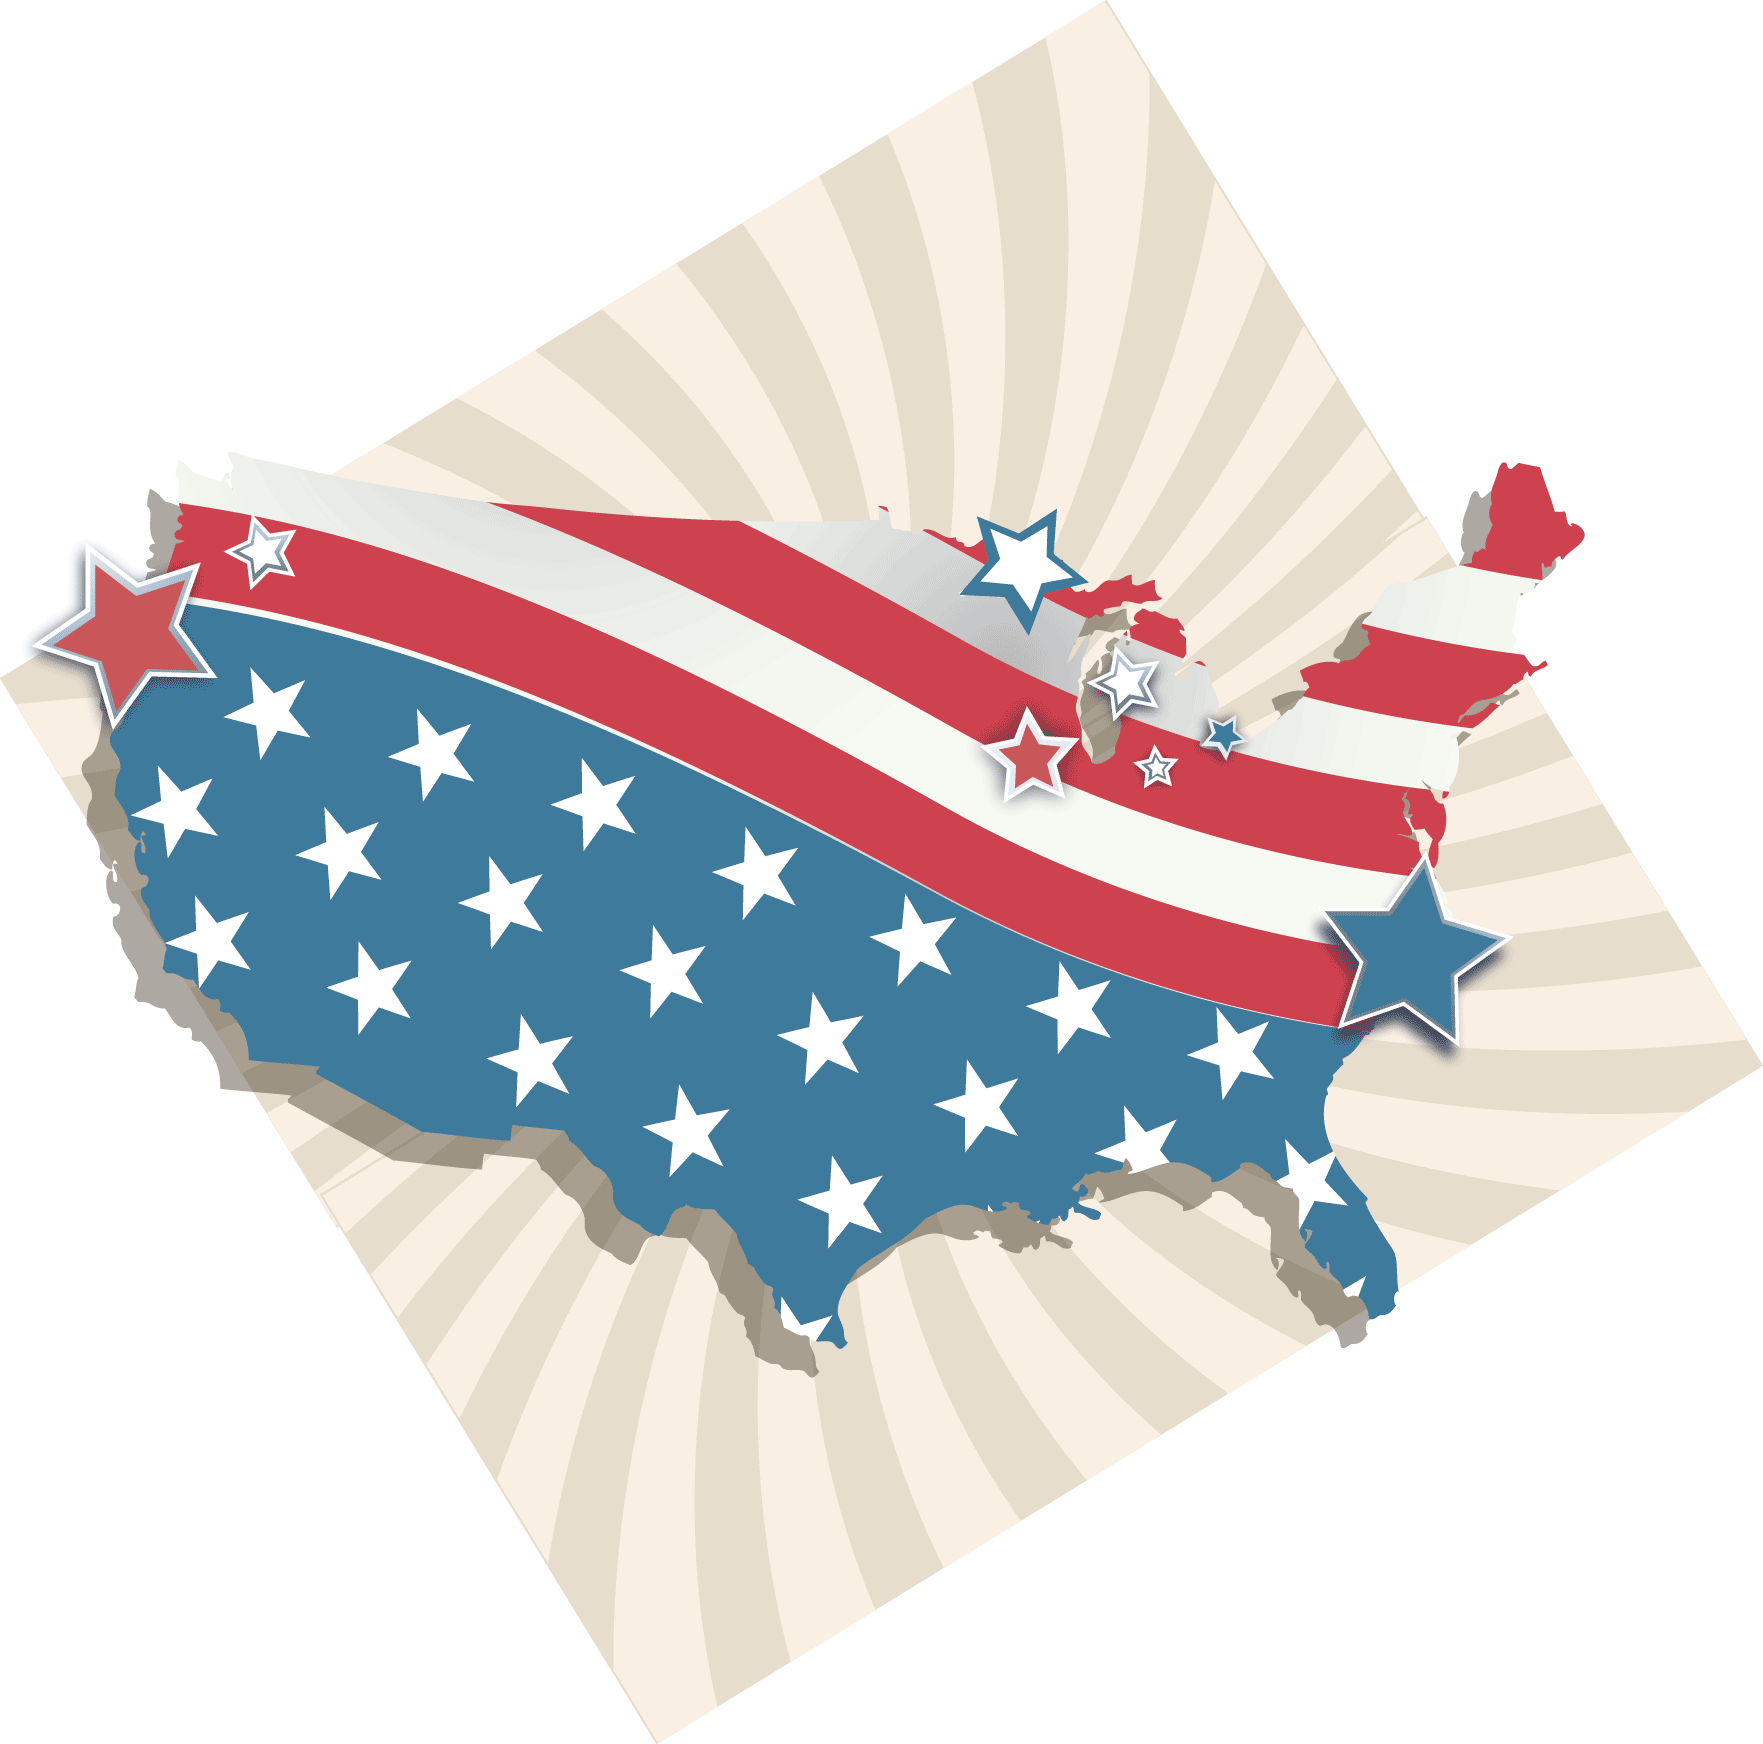 Most Sinful States in America - Find out what the most sinful states are in the United States. Did the state you live in make the list? Read on to find out! You might be surprised! #SinfulStates